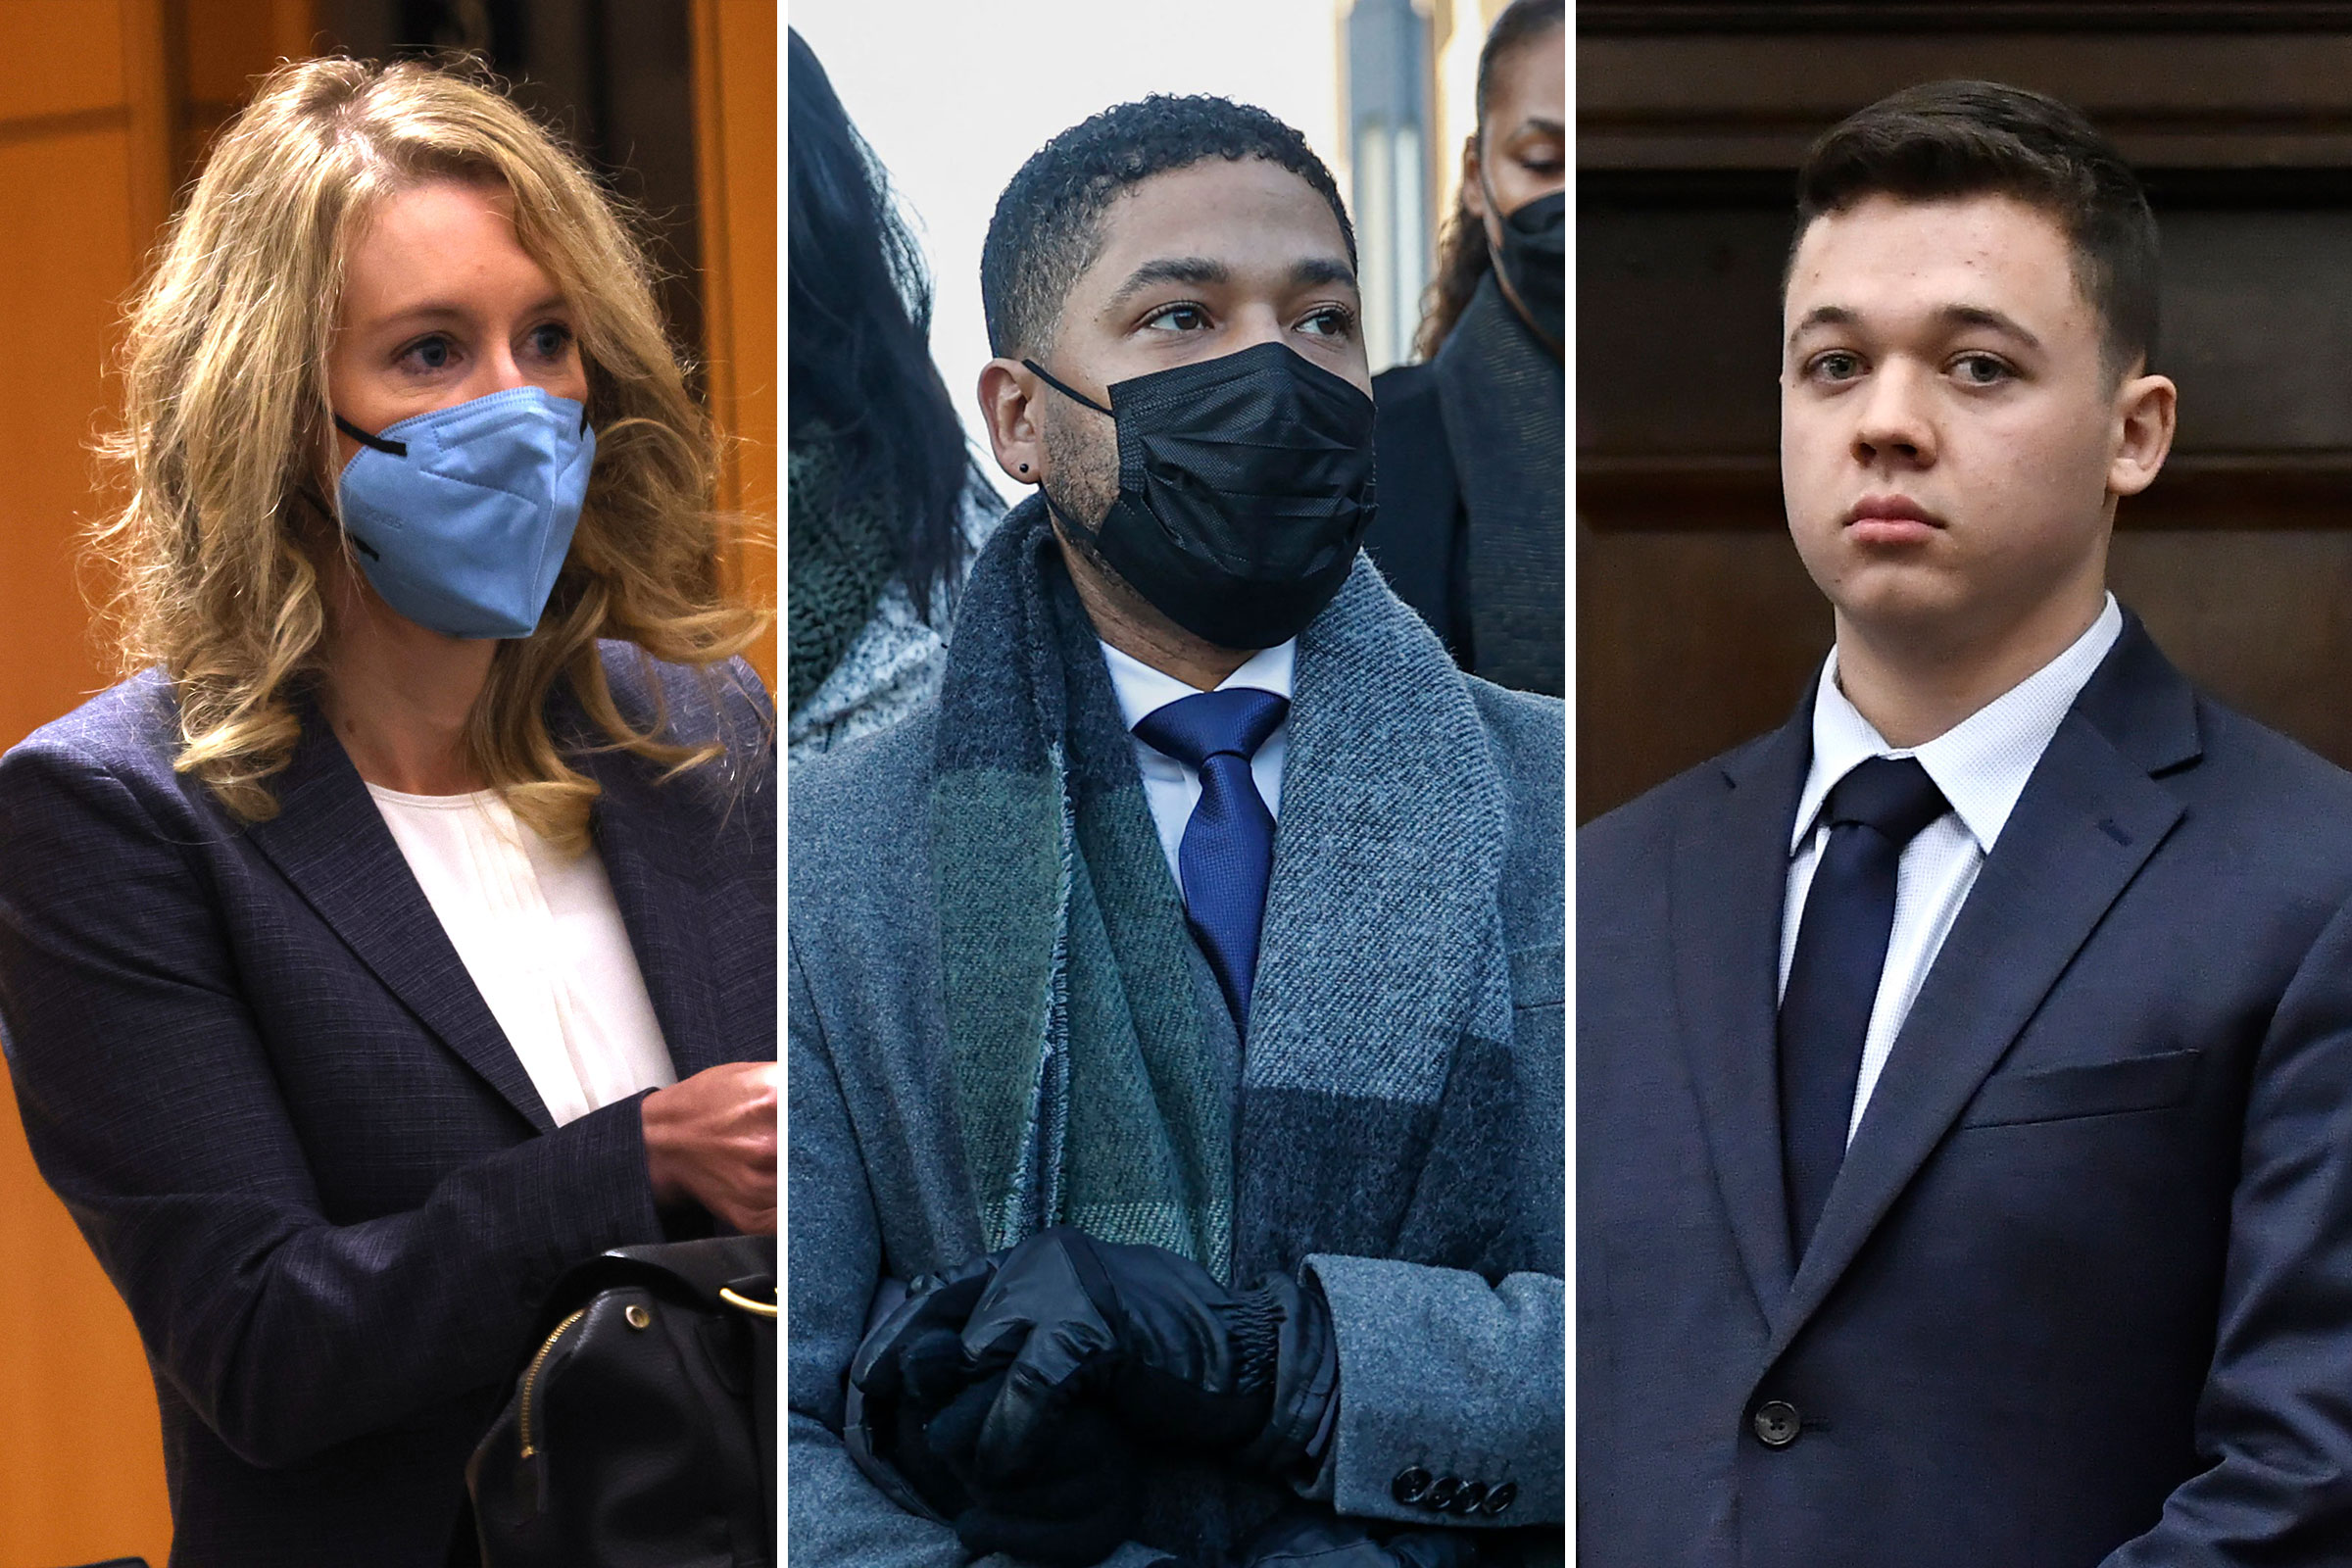 Elizabeth Holmes, Jussie Smollett and Kyle Rittenhouse all testified in their own defense in their criminal trials. (Justin Sullivan— Getty Images; Kamil Krzaczynski—AFP/Getty Images; Sean Krajacic—Pool/Getty Images)